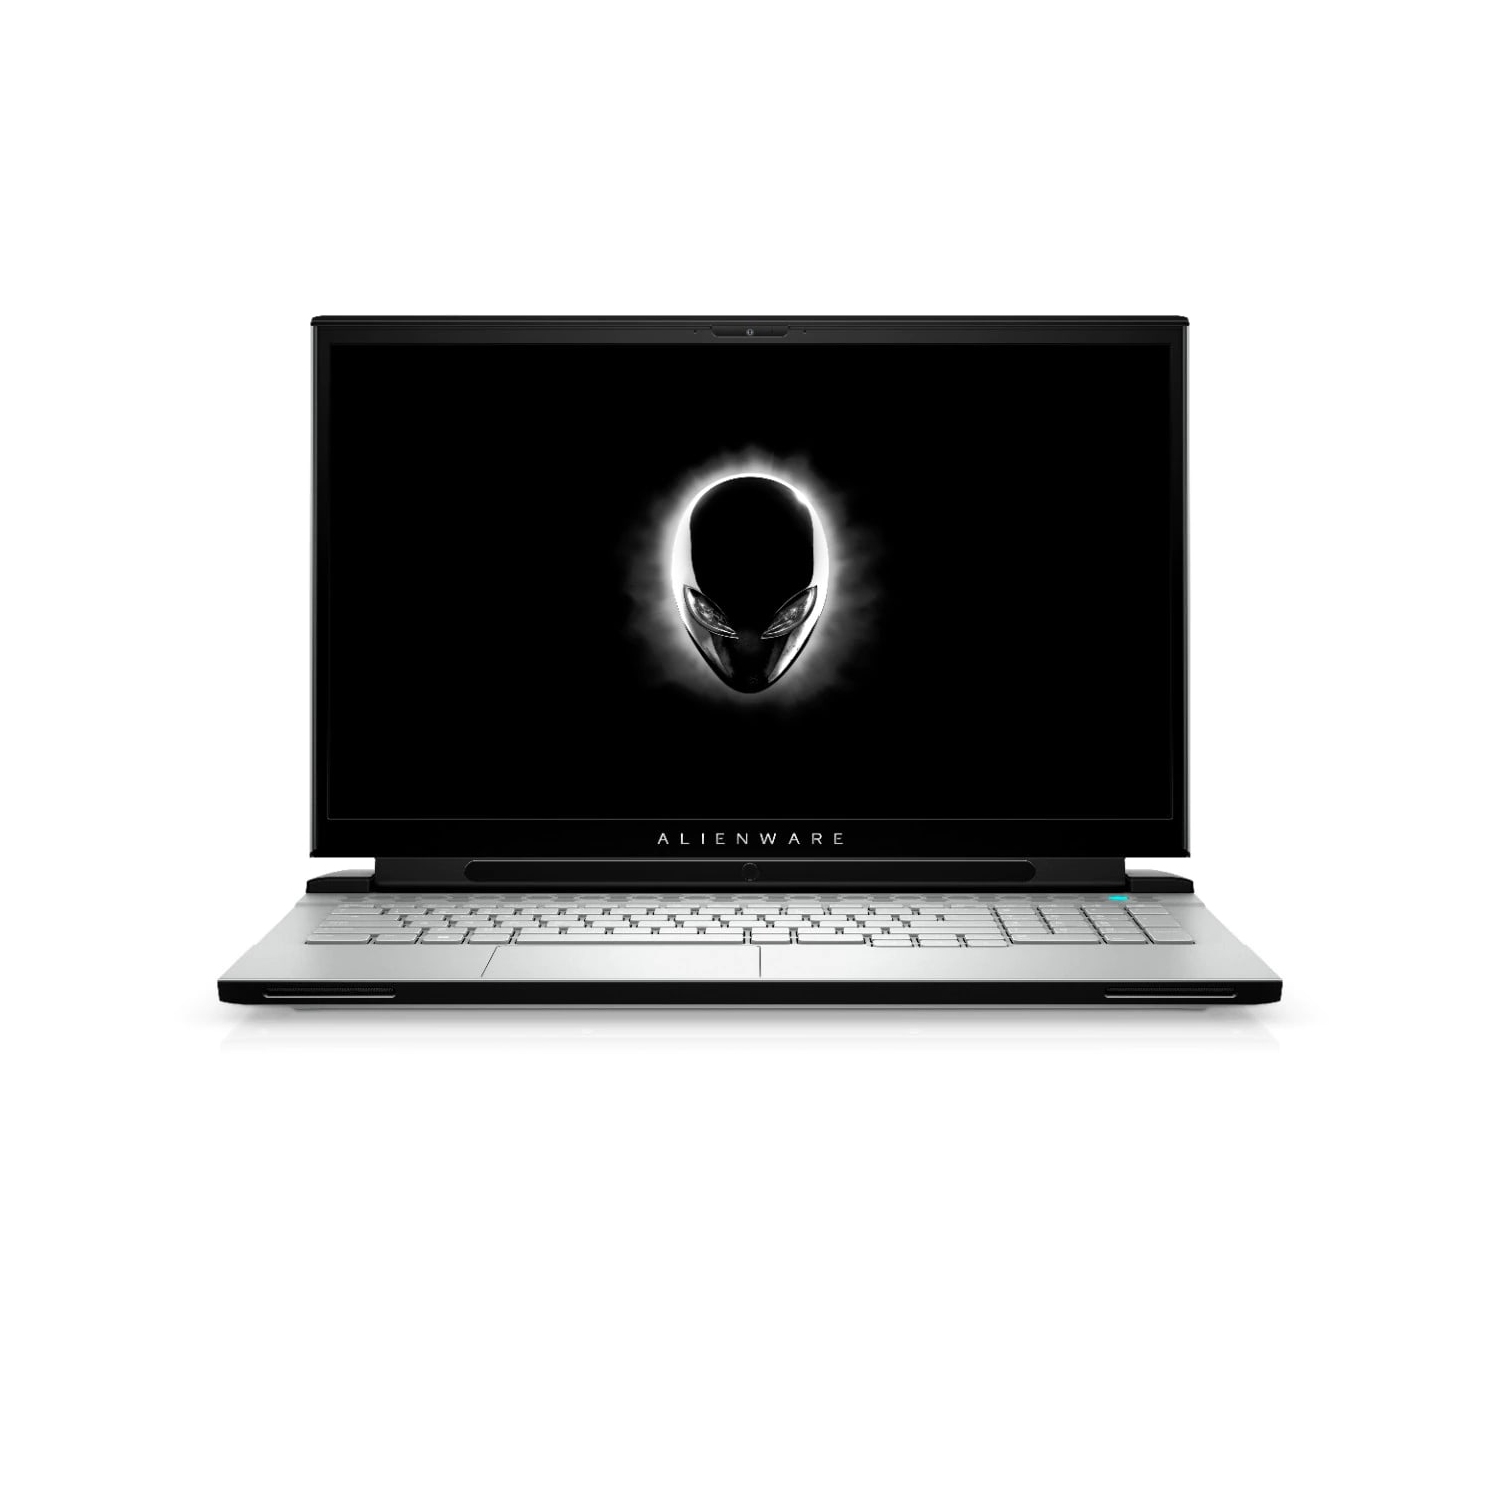 Refurbished (Excellent) - Dell Alienware m17 R3 Gaming Laptop (2020), 17.3" FHD, Core i7, 1TB SSD + 512GB SSD, 16GB RAM, RTX 2070, 5 GHz, 10th Gen CPU Certified